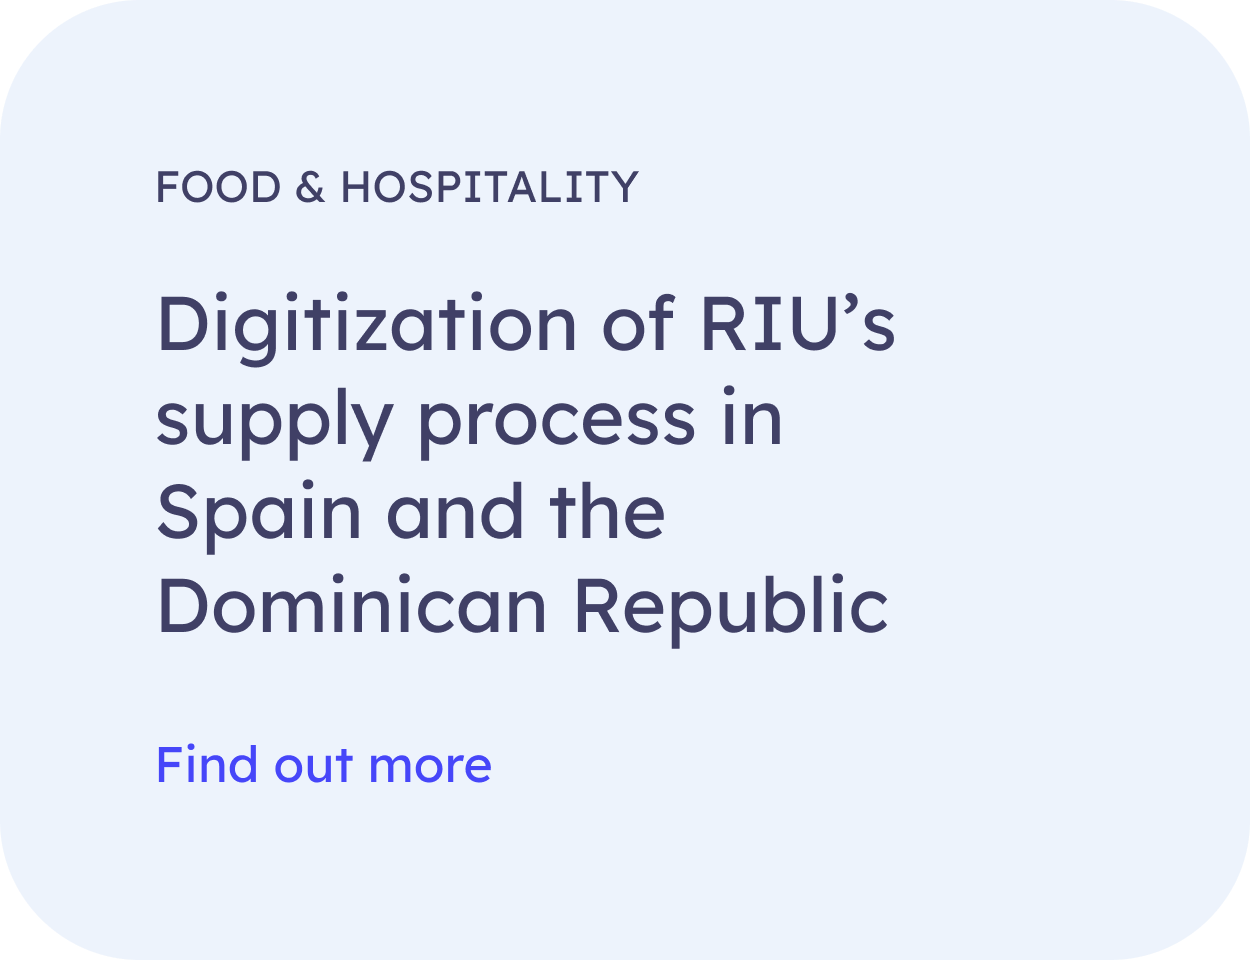 Digitization of RIU’s supply process in Spain and the Dominican Republic